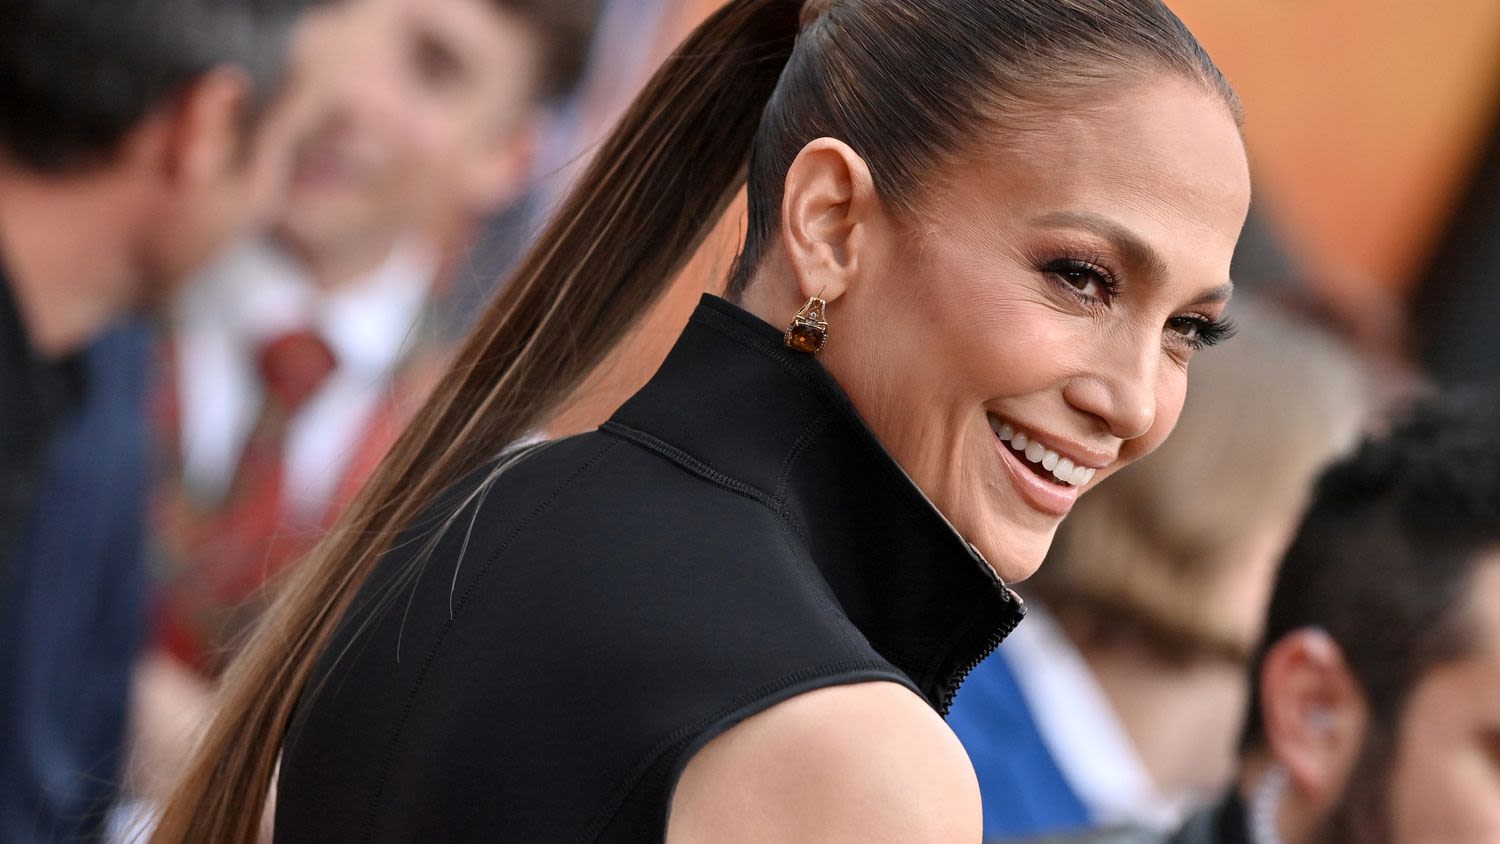 Jennifer Lopez Is Viewing Her 55th Birthday as a "Fresh Start" Amid Marital Issues With Ben Affleck